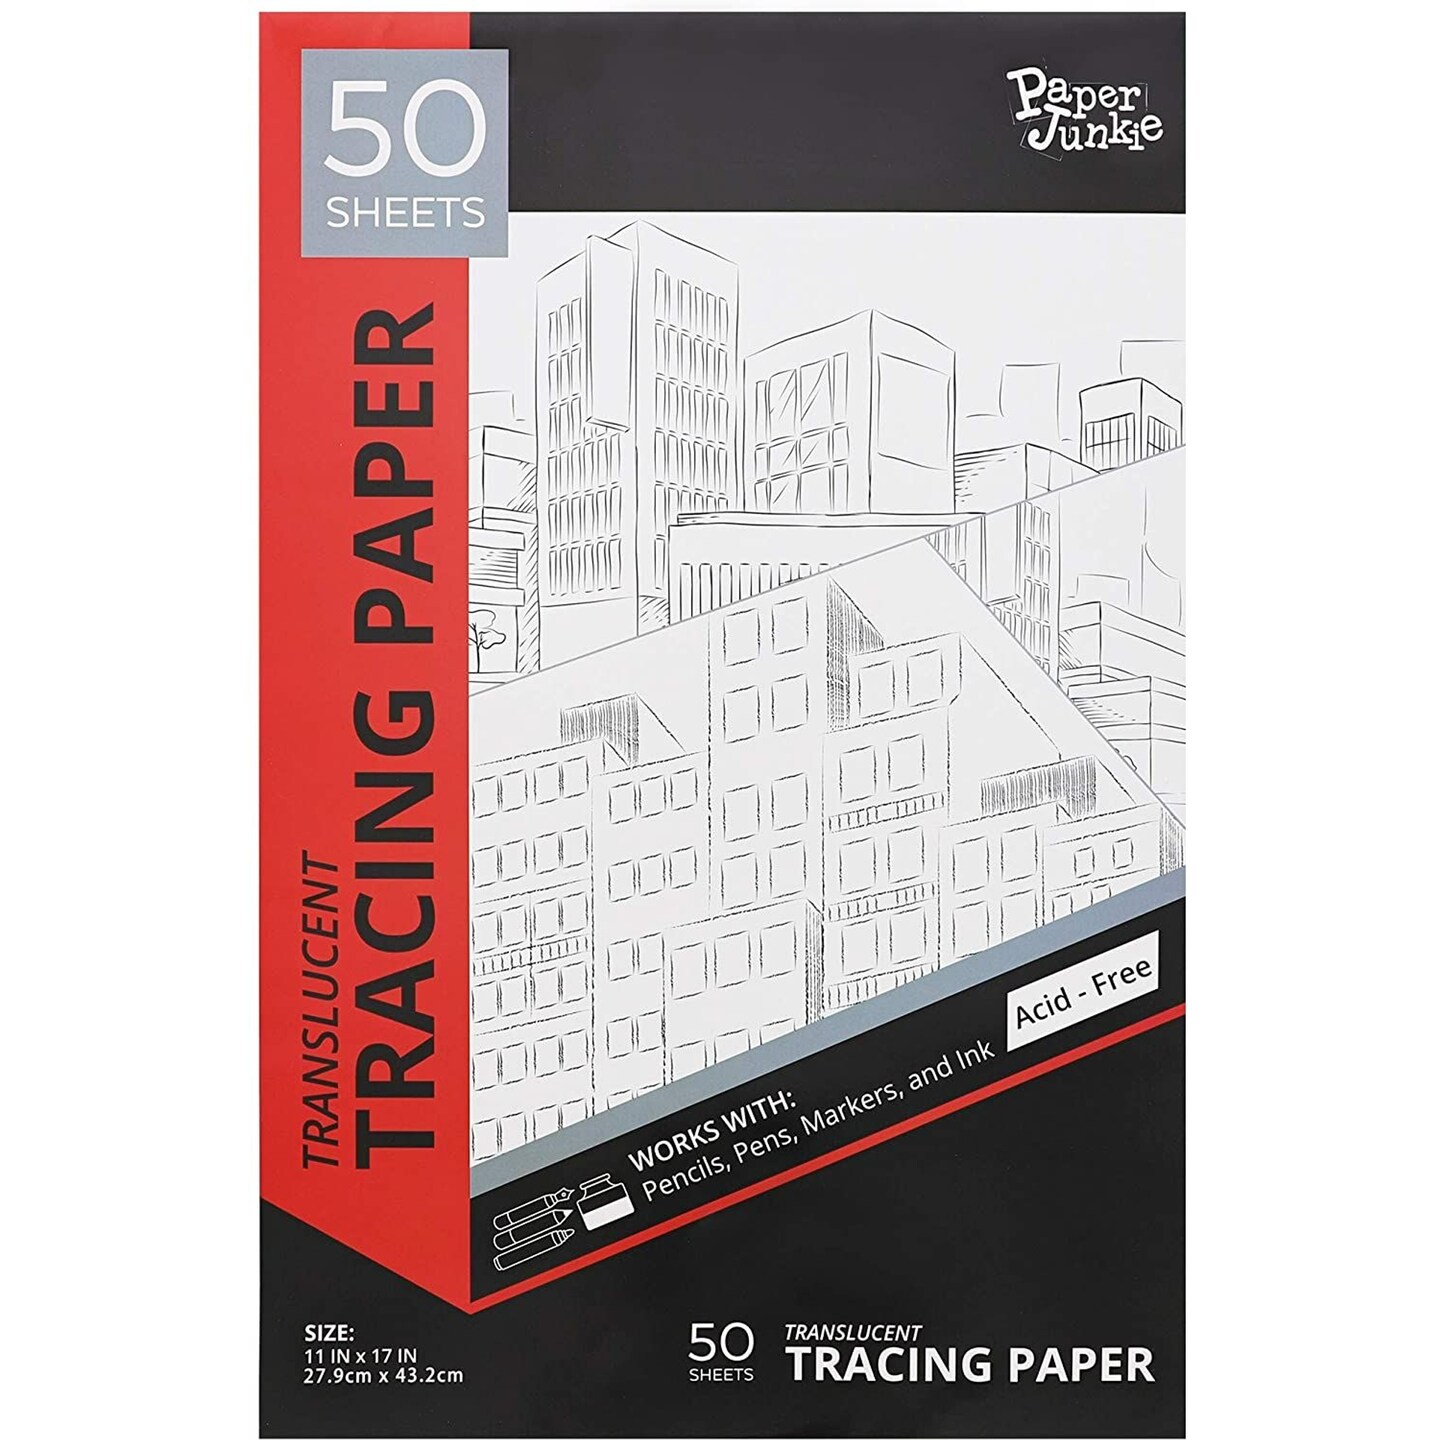 PRO ART Tracing Vellum Paper Pad, 37lb, 8.5 x 11, 50 sheets, Translucent  Tracing Paper for tracing and drawing, pattern paper for sewing, drafting  paper, protecting artwork 